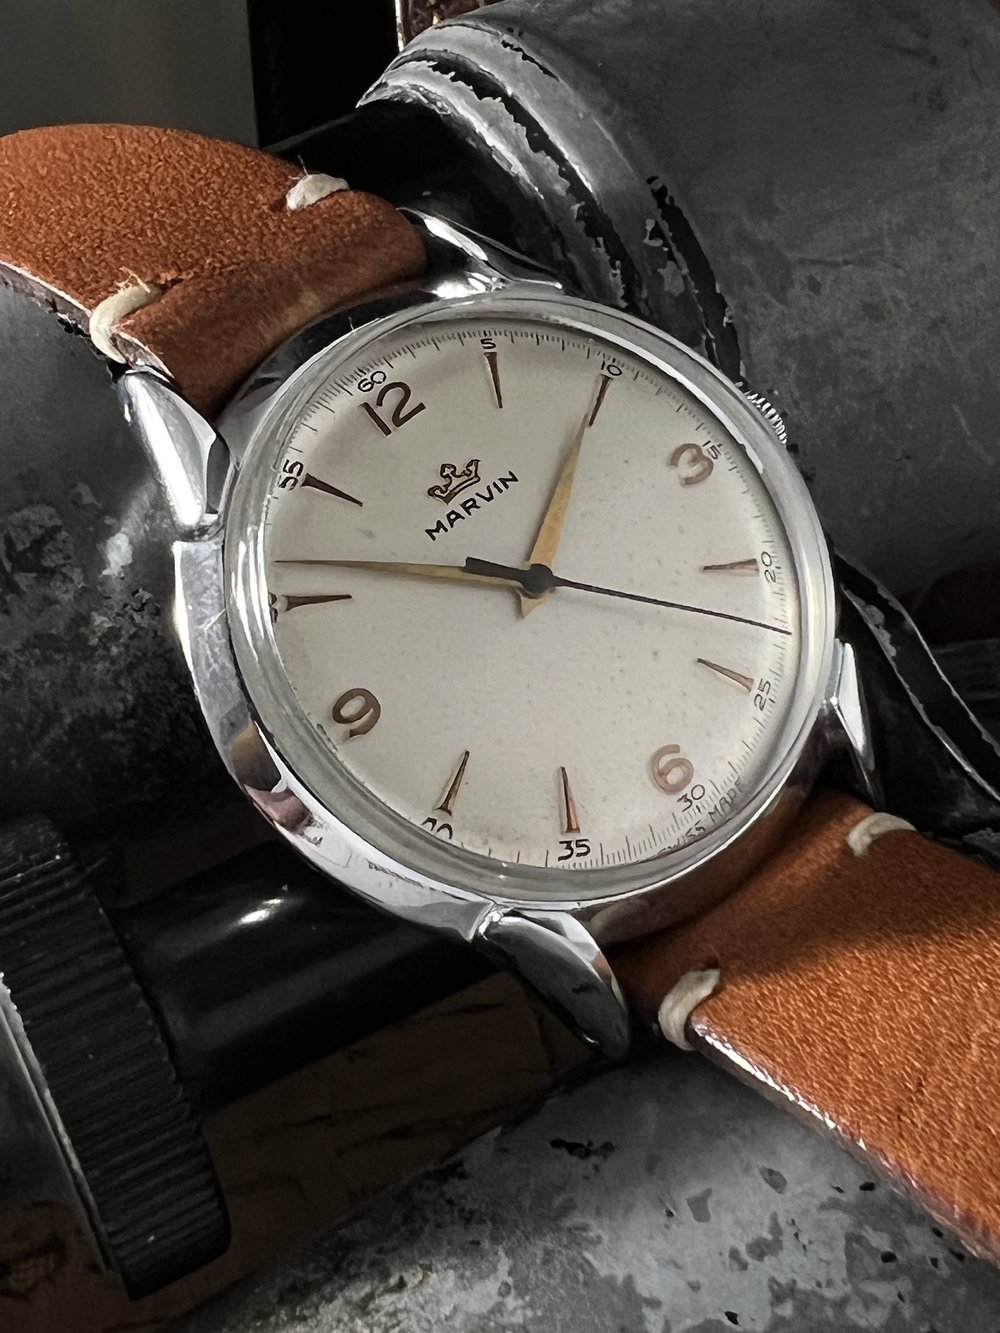 Cool Vintage Watches